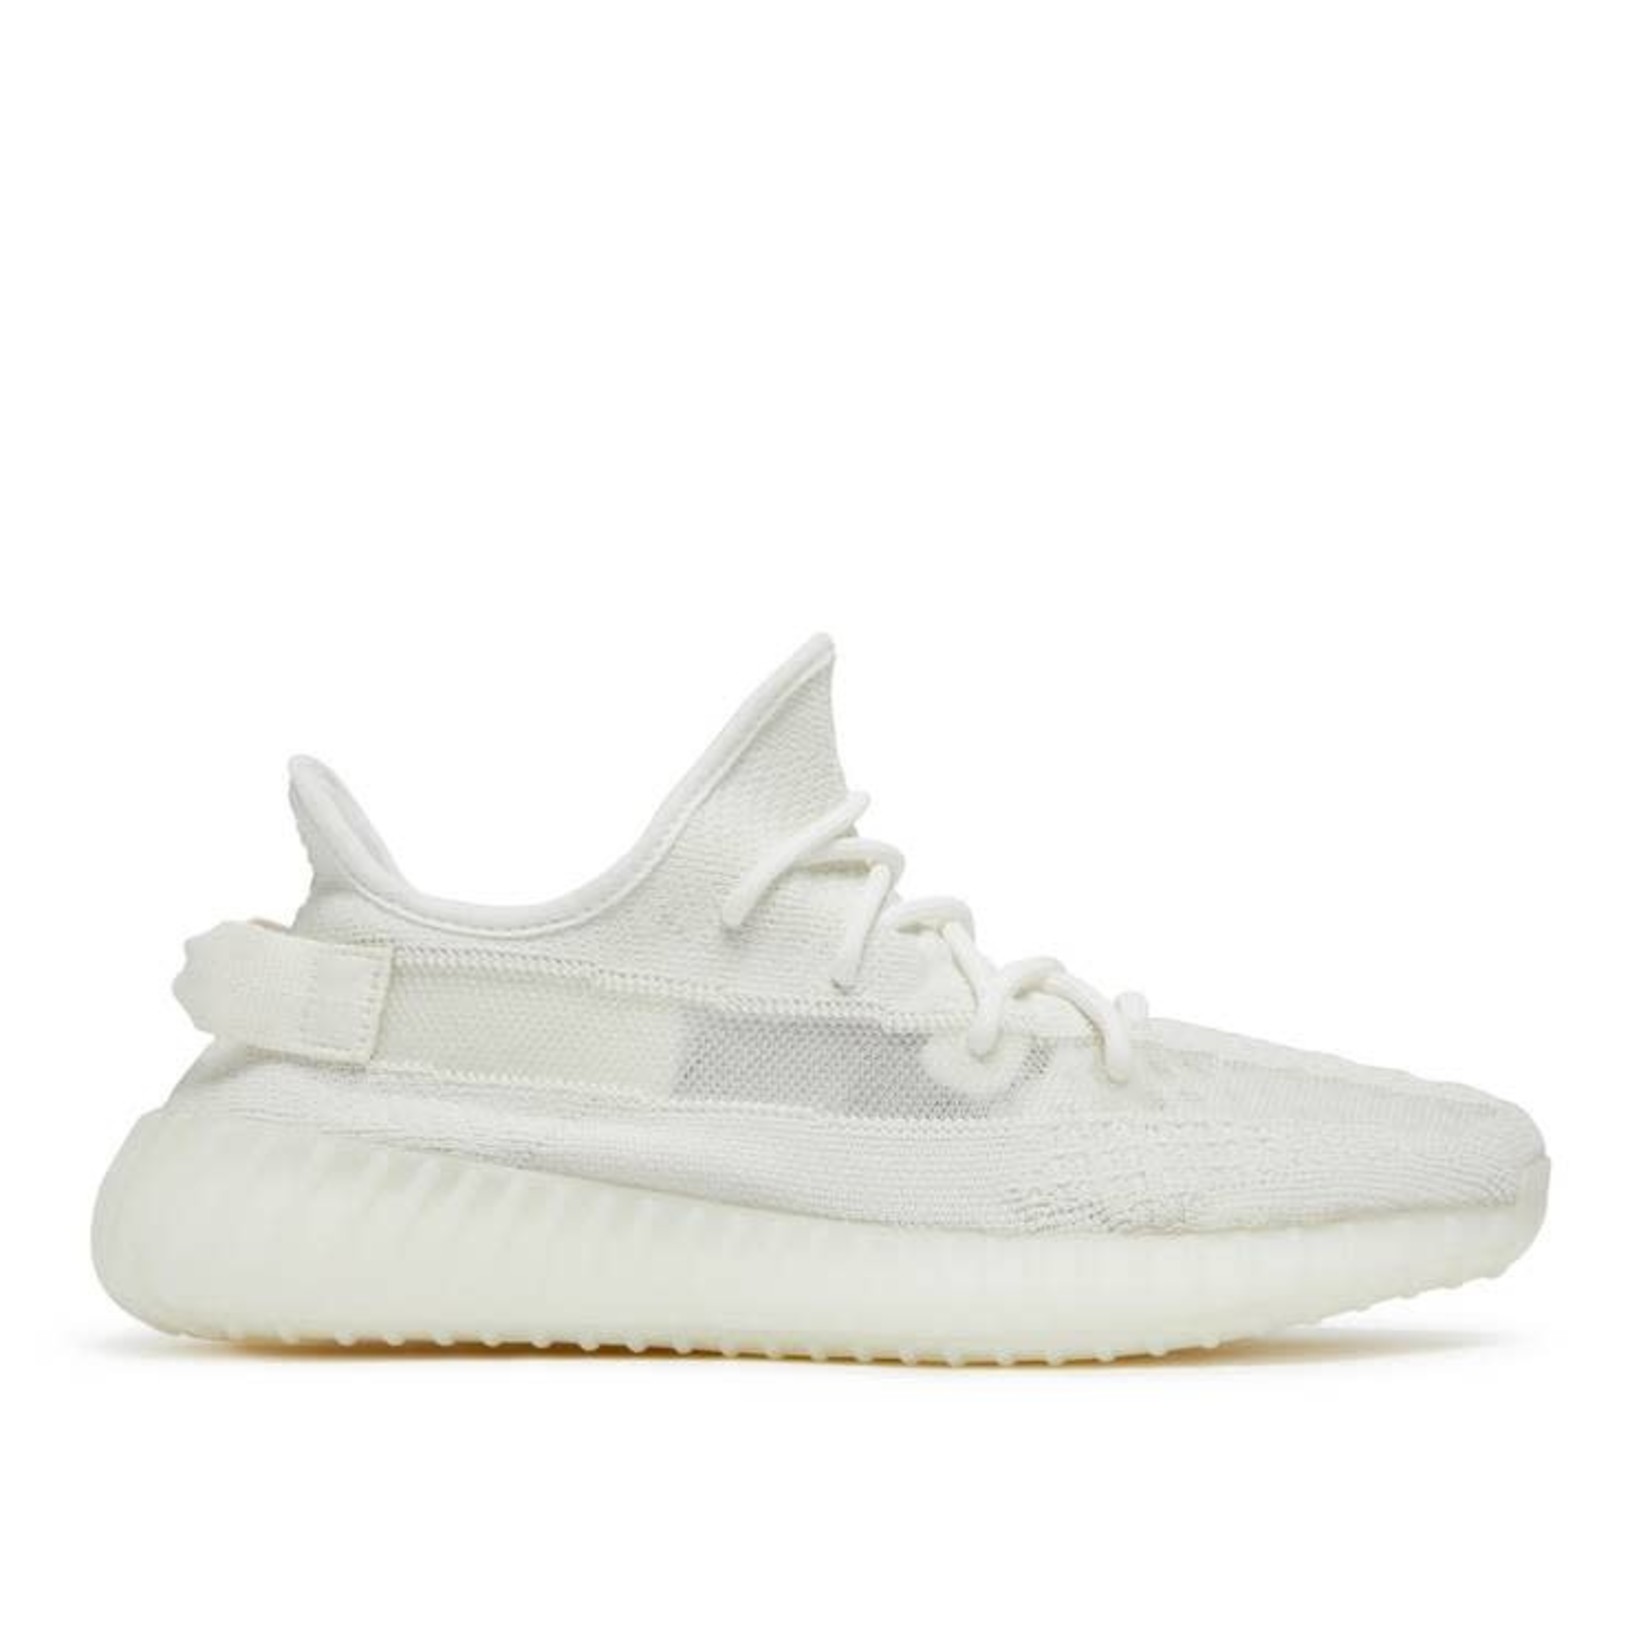 Slink opportunity nature Park Adidas Adidas Yeezy Boost 350 V2 Bone Size 10.5, DS BRAND NEW - SoleSeattle